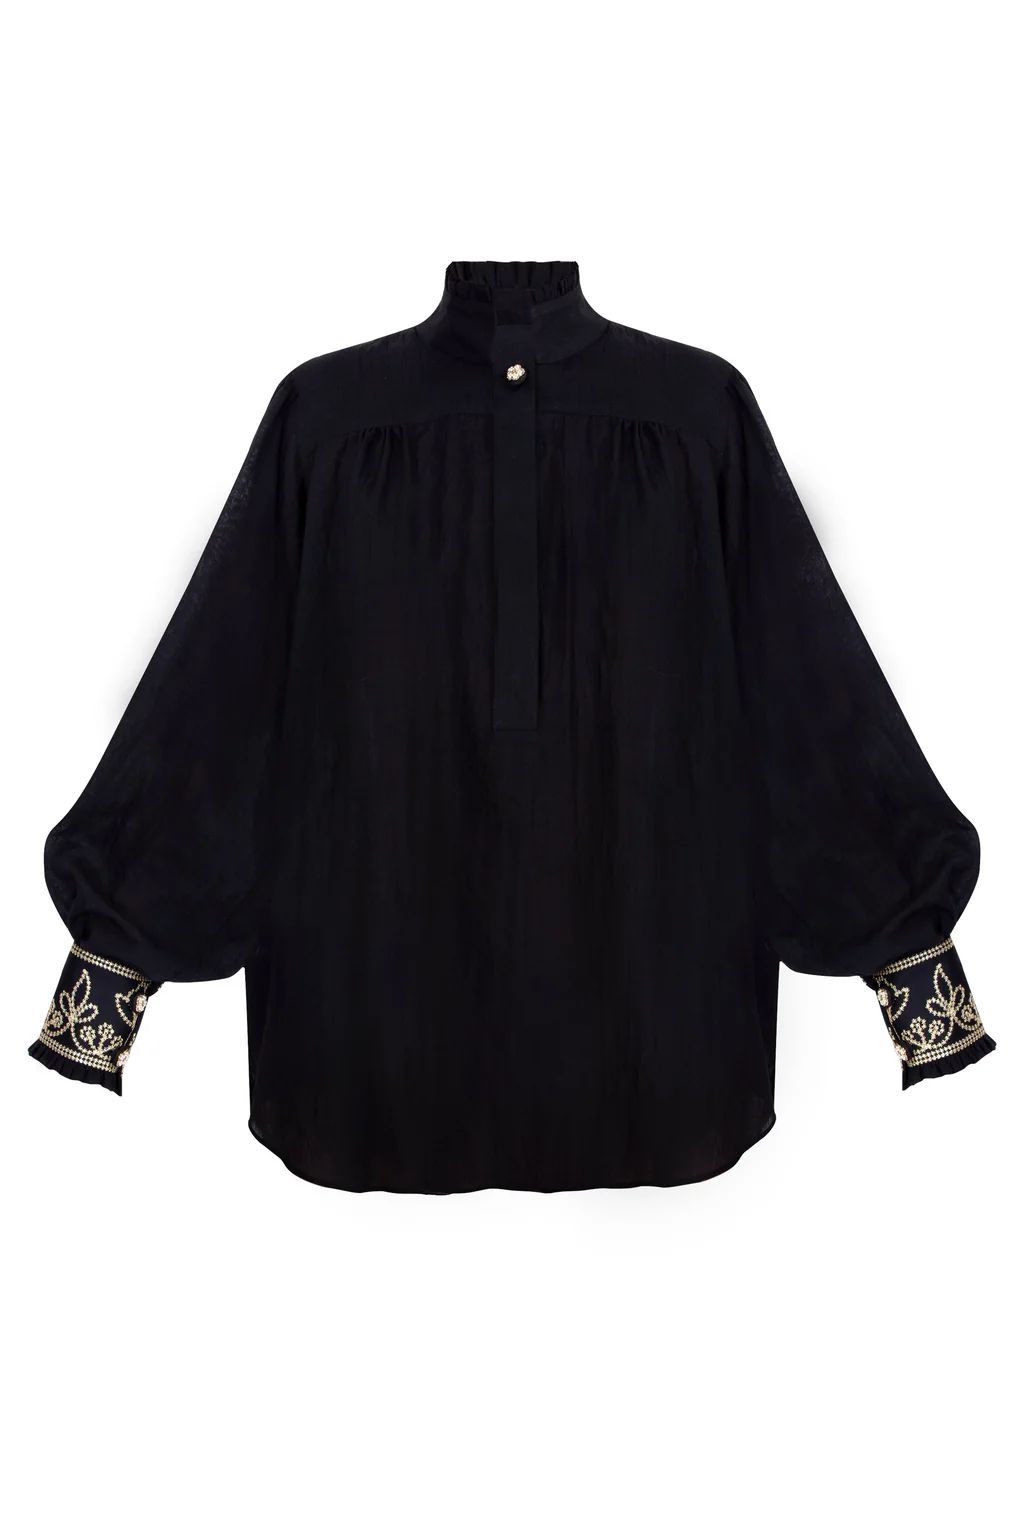 Lotus Blouse - Black | Rosewater Collective